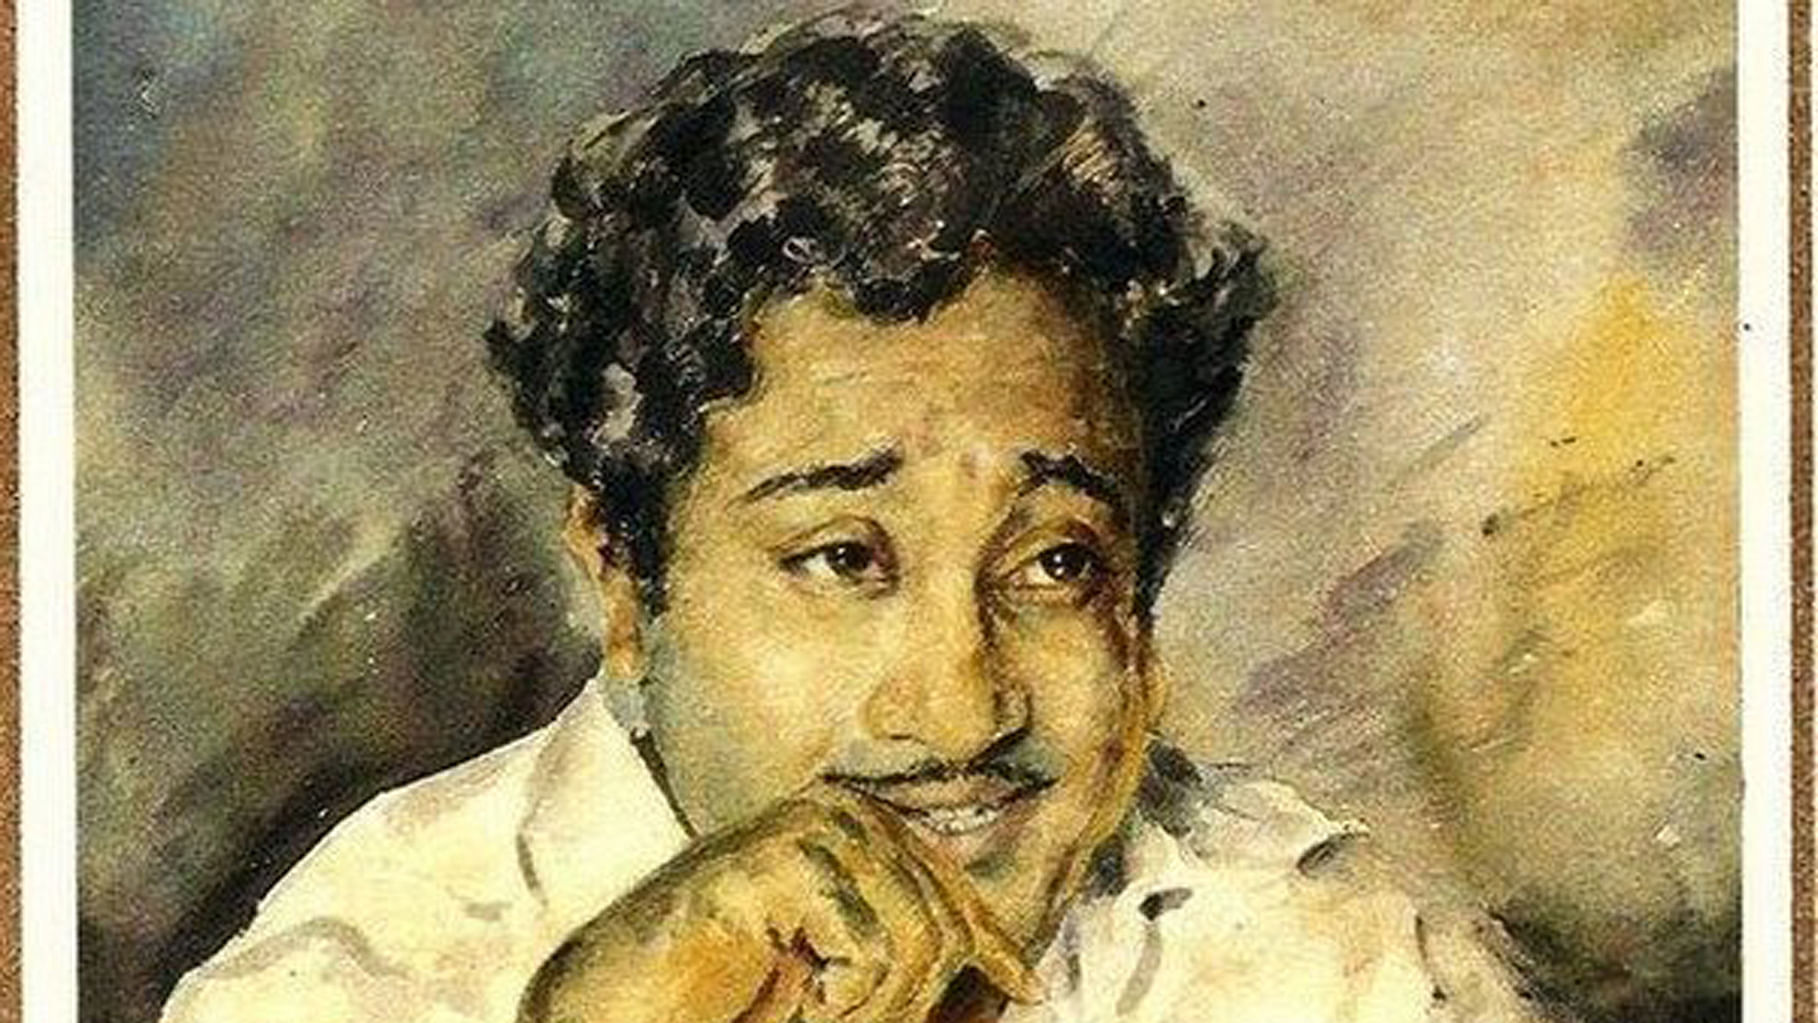 Sivaji Ganesan brought in a wave of elegance and a cosmopolitan style that was quite new to Tamil cinema.